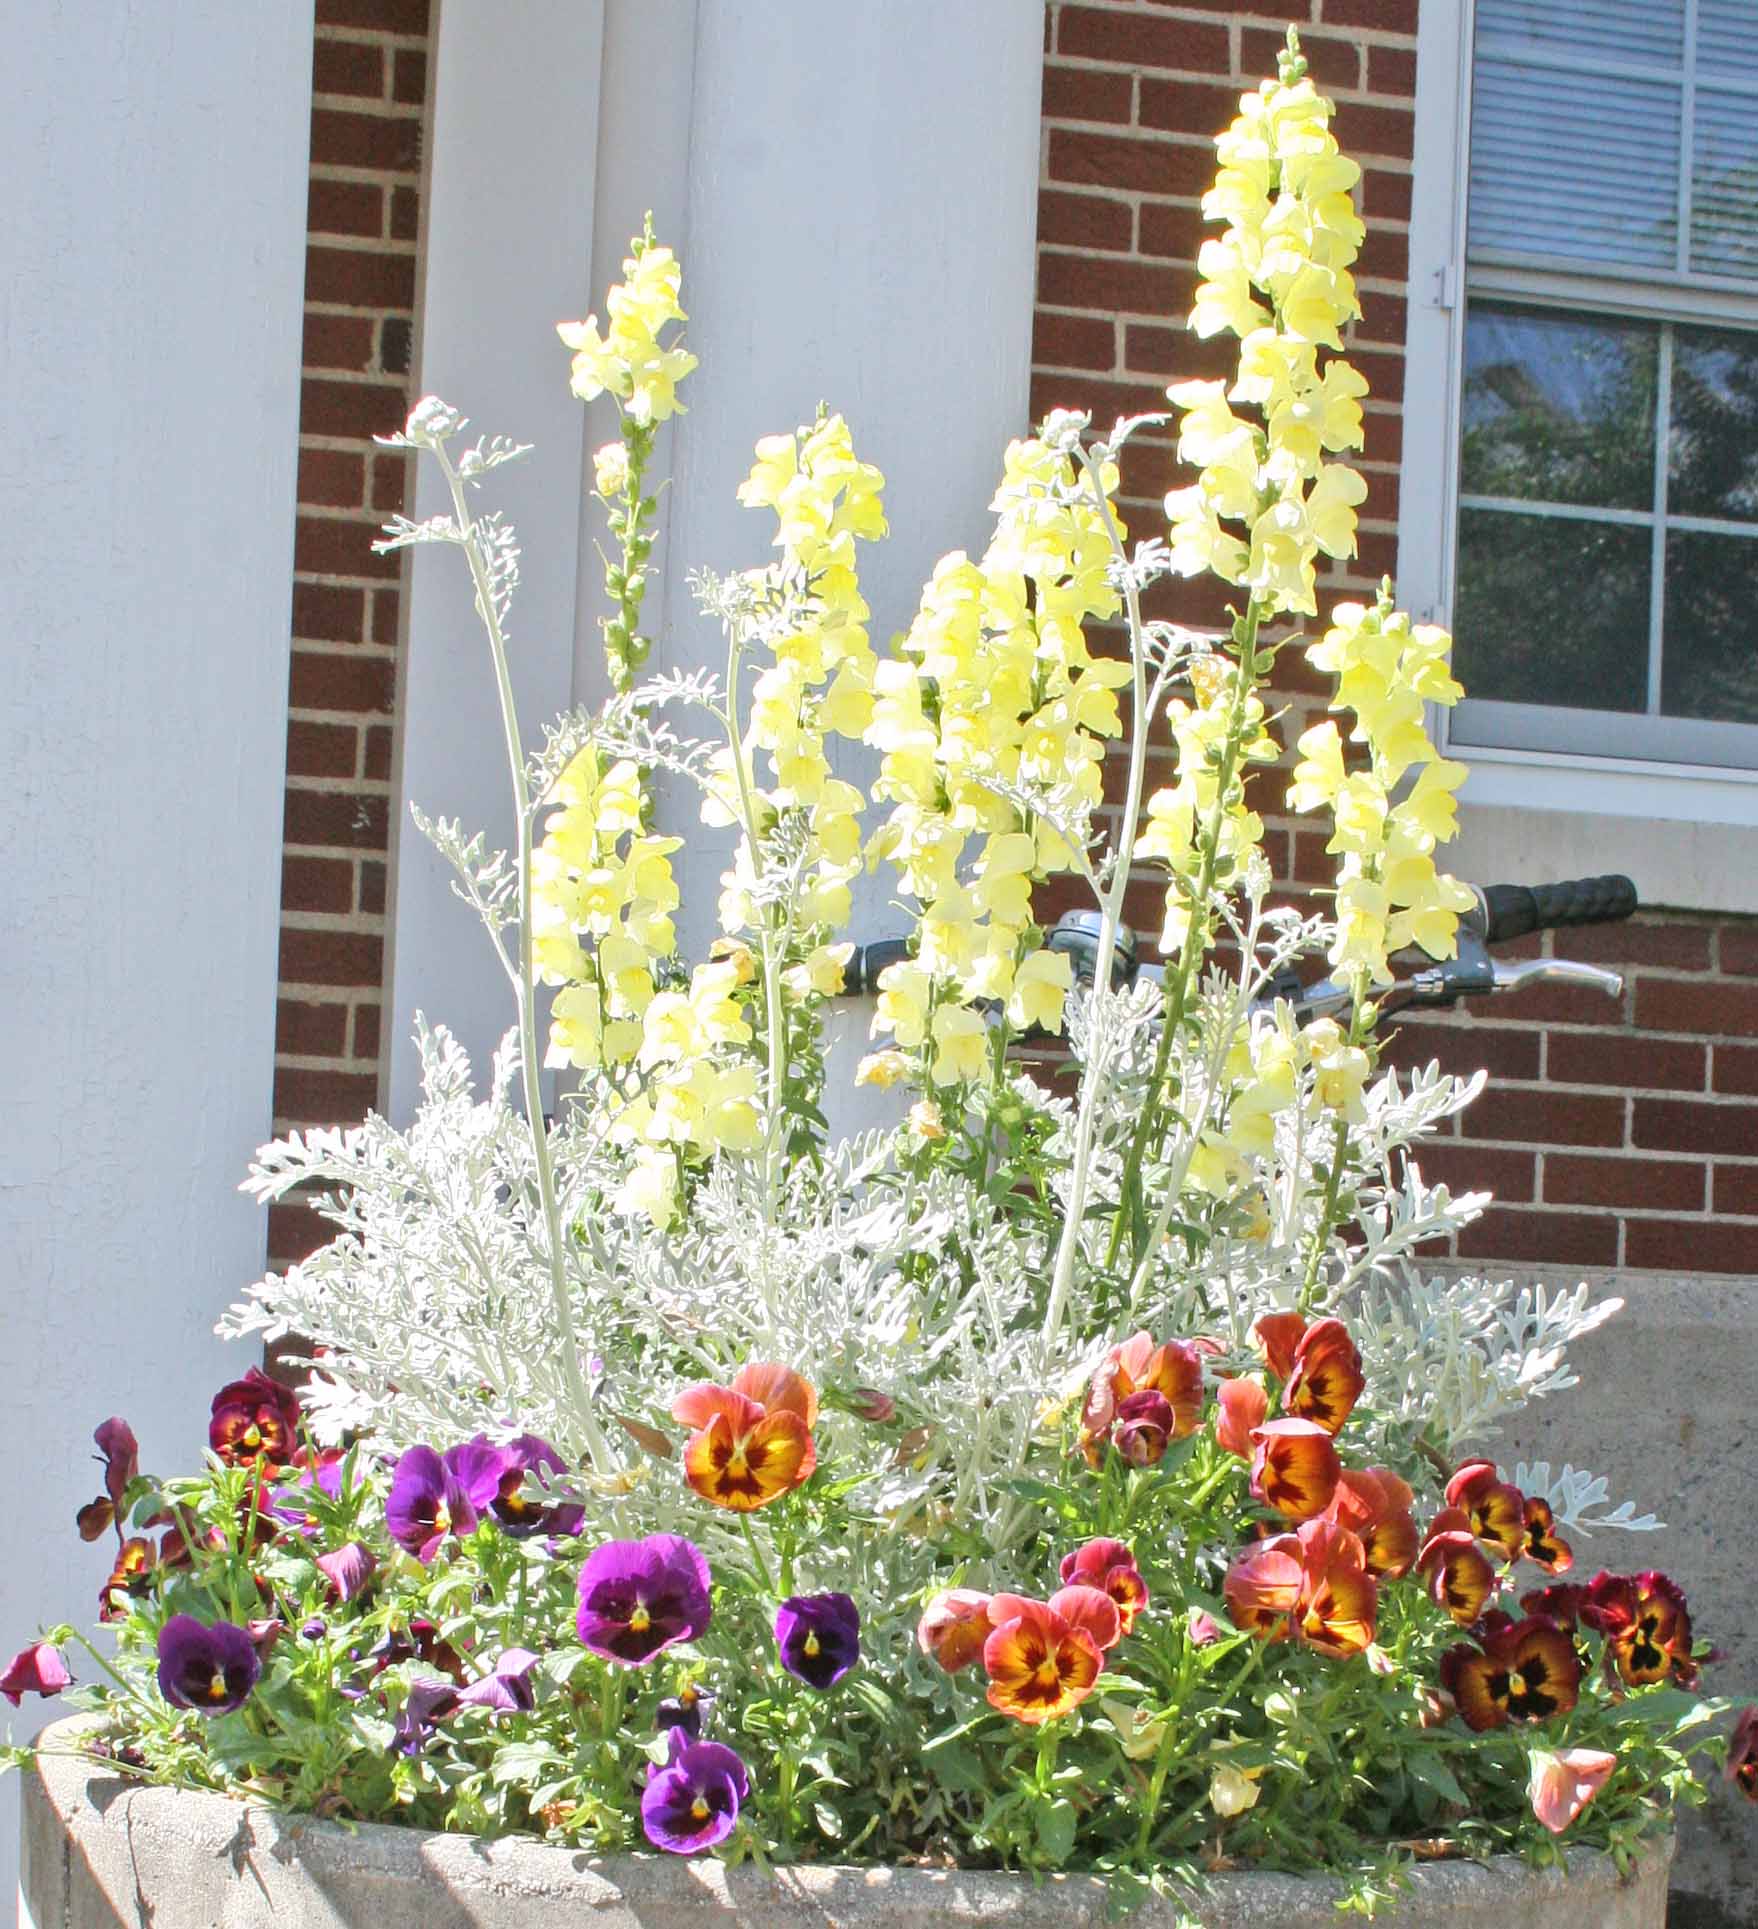 This year, why not skip the Mother's Day bouquet, and make mom a living collection of flowers and plants that may last for years? Matthew Chappell, a UGA Extension horticulturist, has several tips for creating the perfect, one-pot container garden.